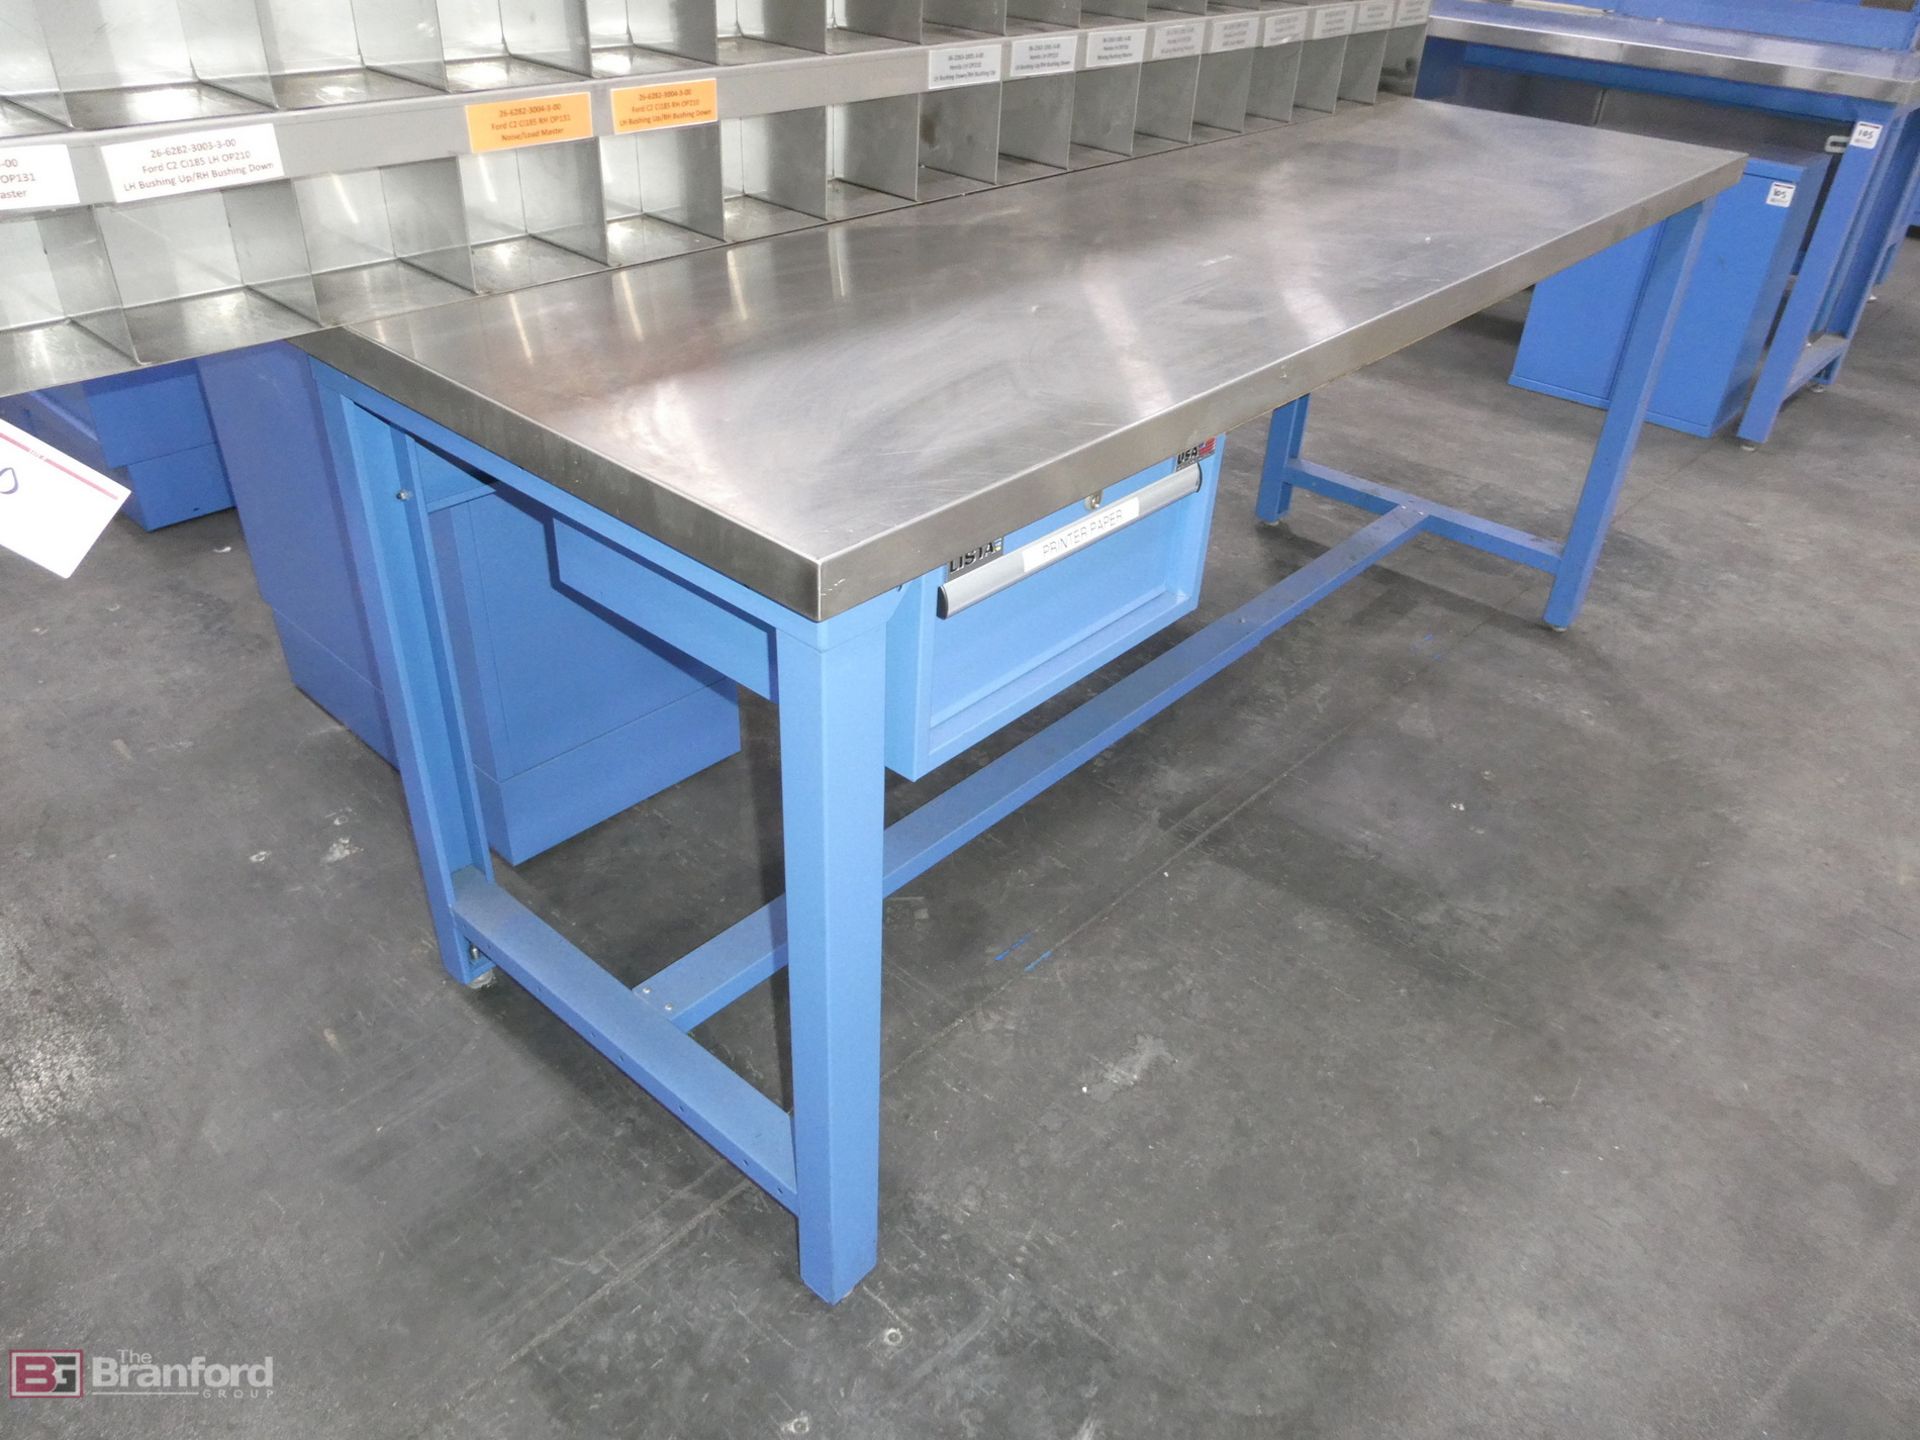 Lista Work Bench 30"x84" - Image 2 of 4